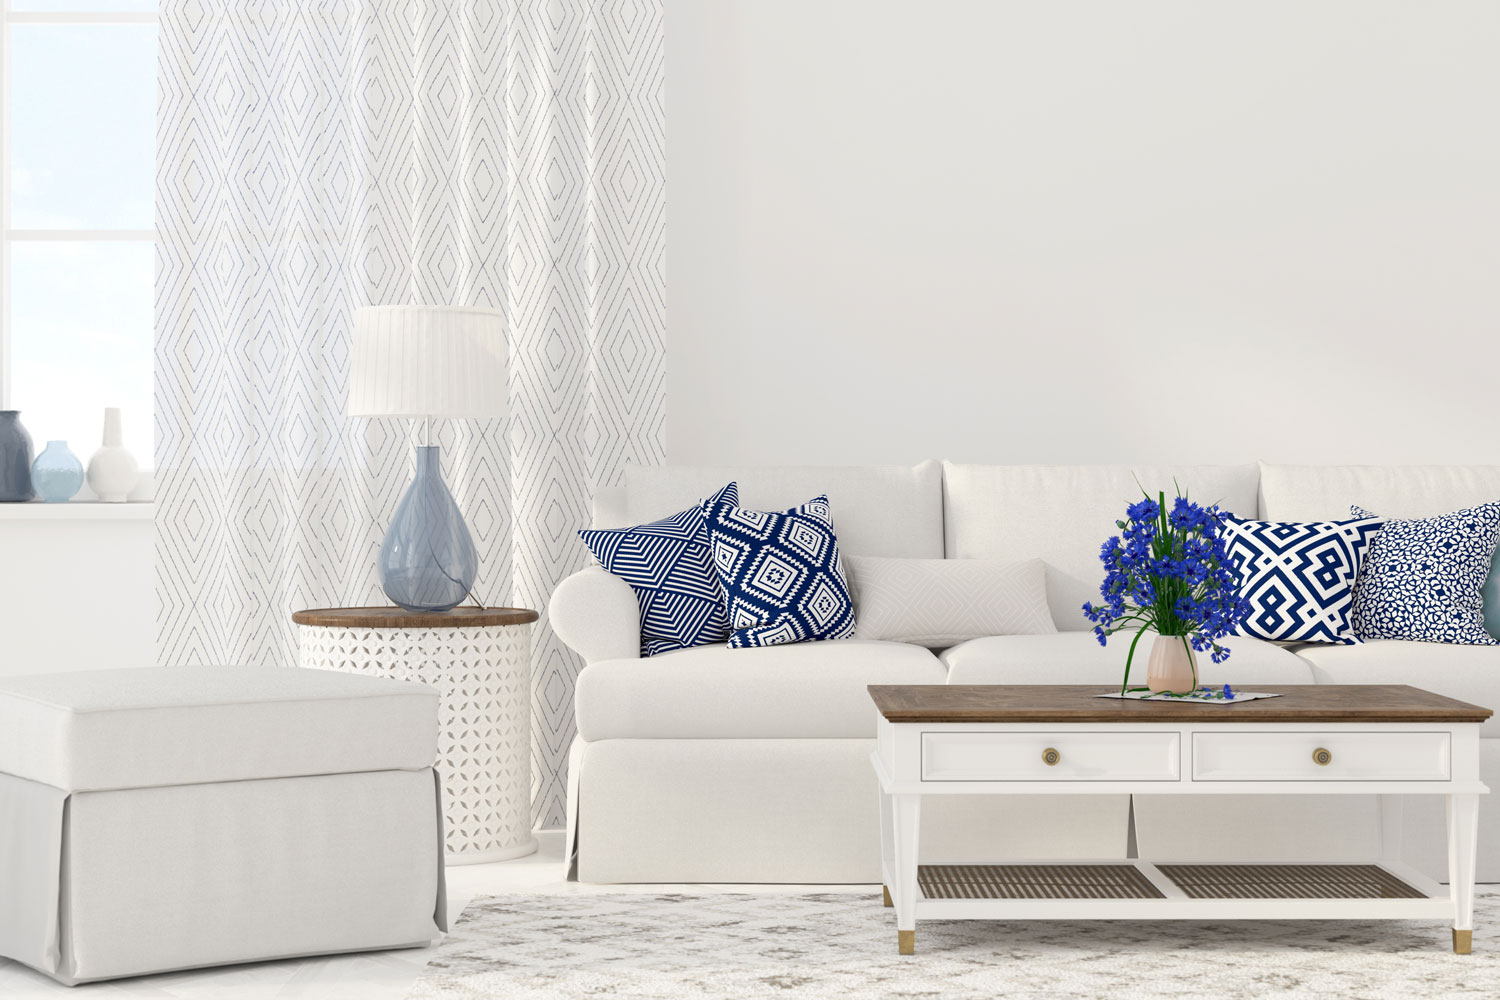 Modern contemporary living room with white sofas, blue patterned throw pillows and curtains